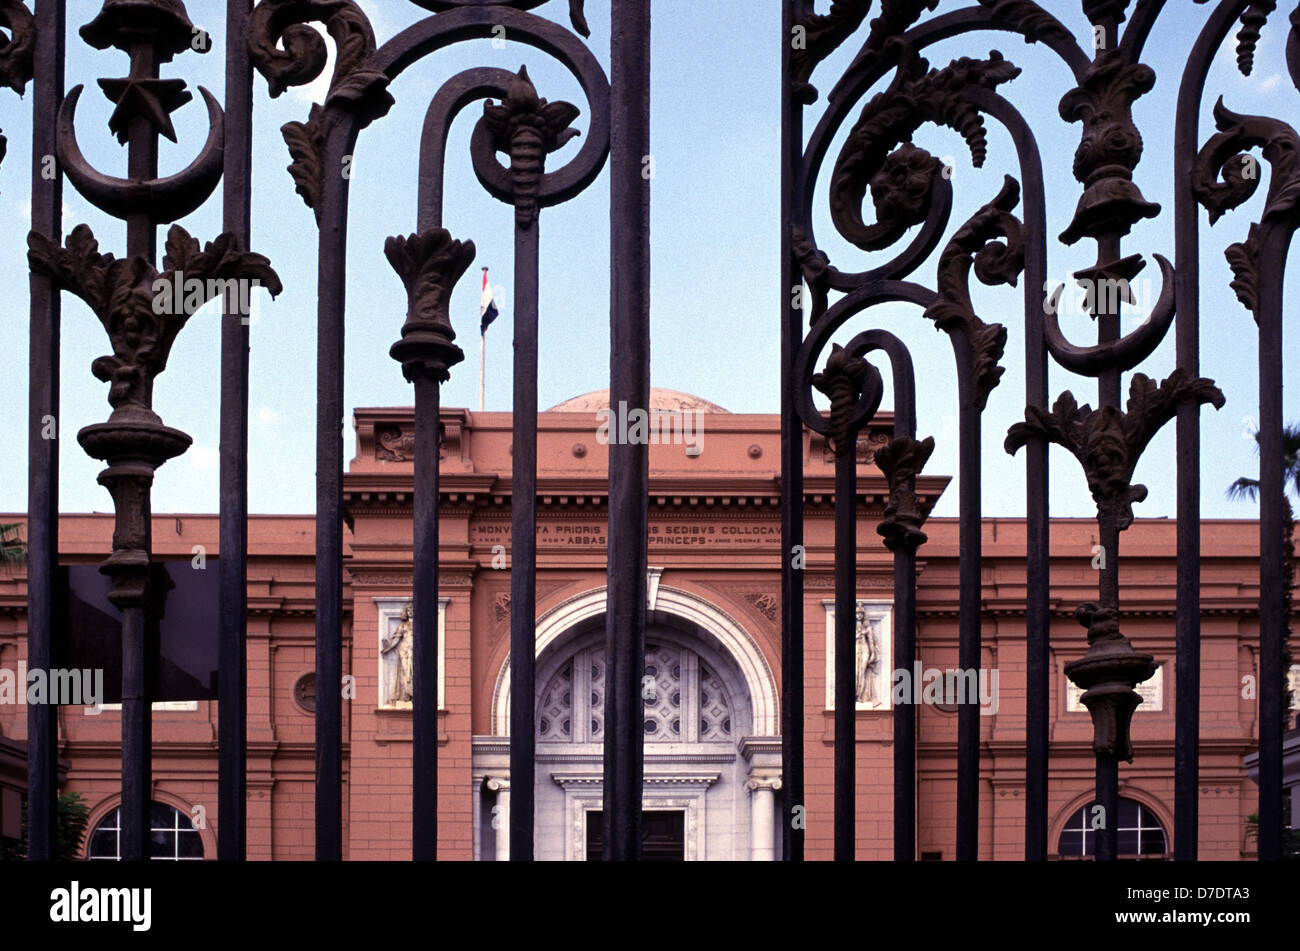 The wrought iron gate of the Museum of Egyptian Antiquities, known commonly as the Egyptian Museum or Museum of Cairo, in Cairo, Egypt Stock Photo